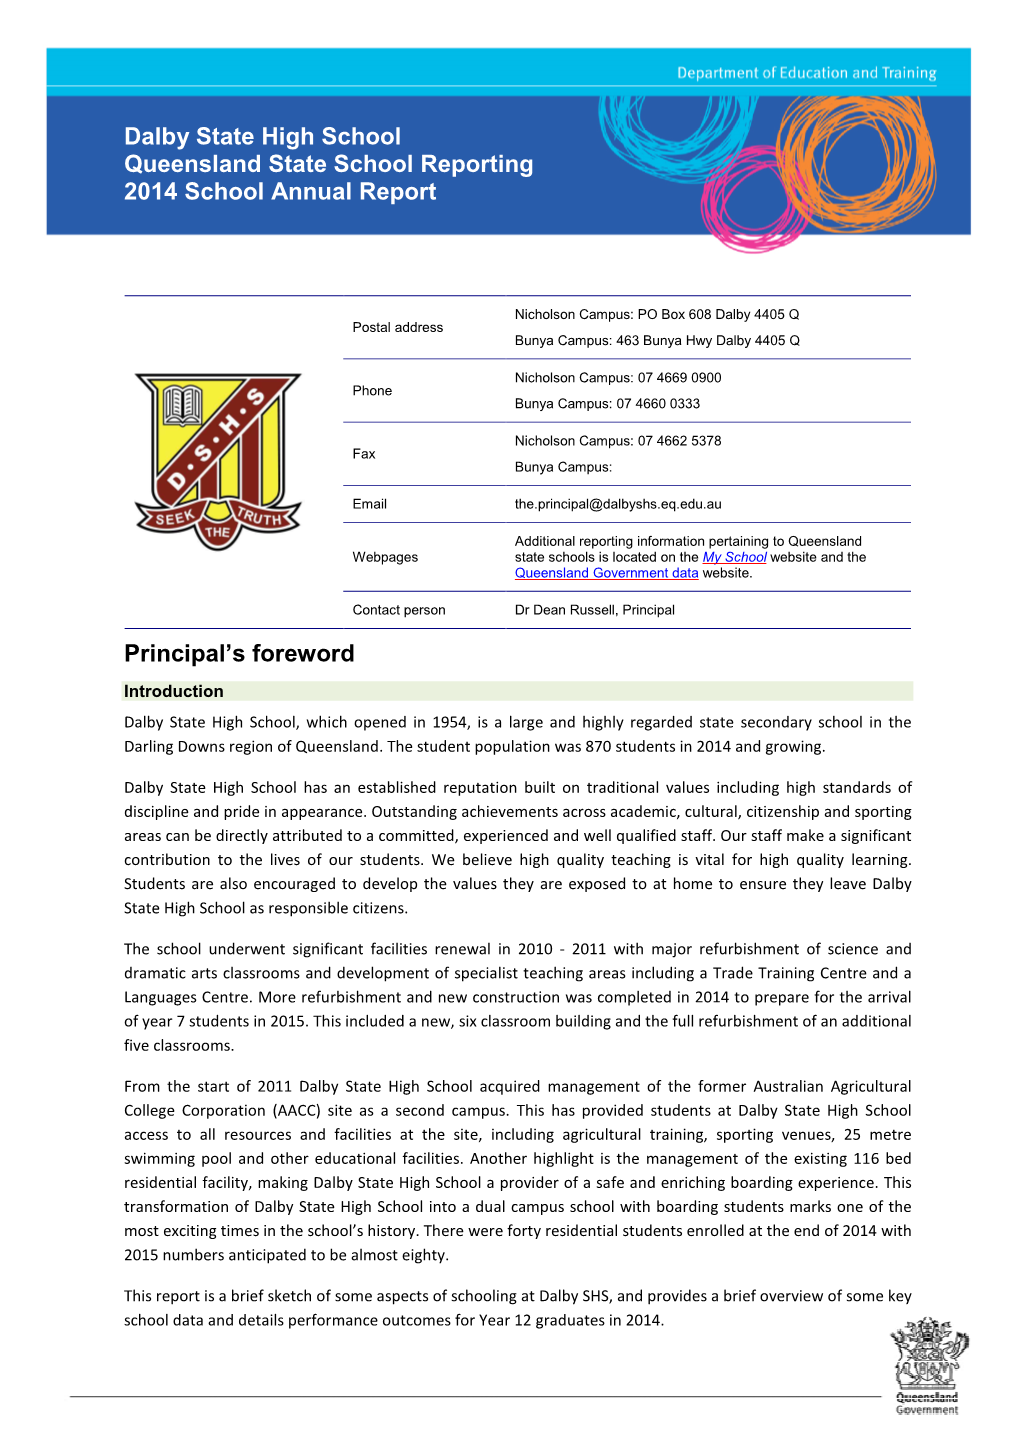 Dalby State High School Queensland State School Reporting 2014 School Annual Report